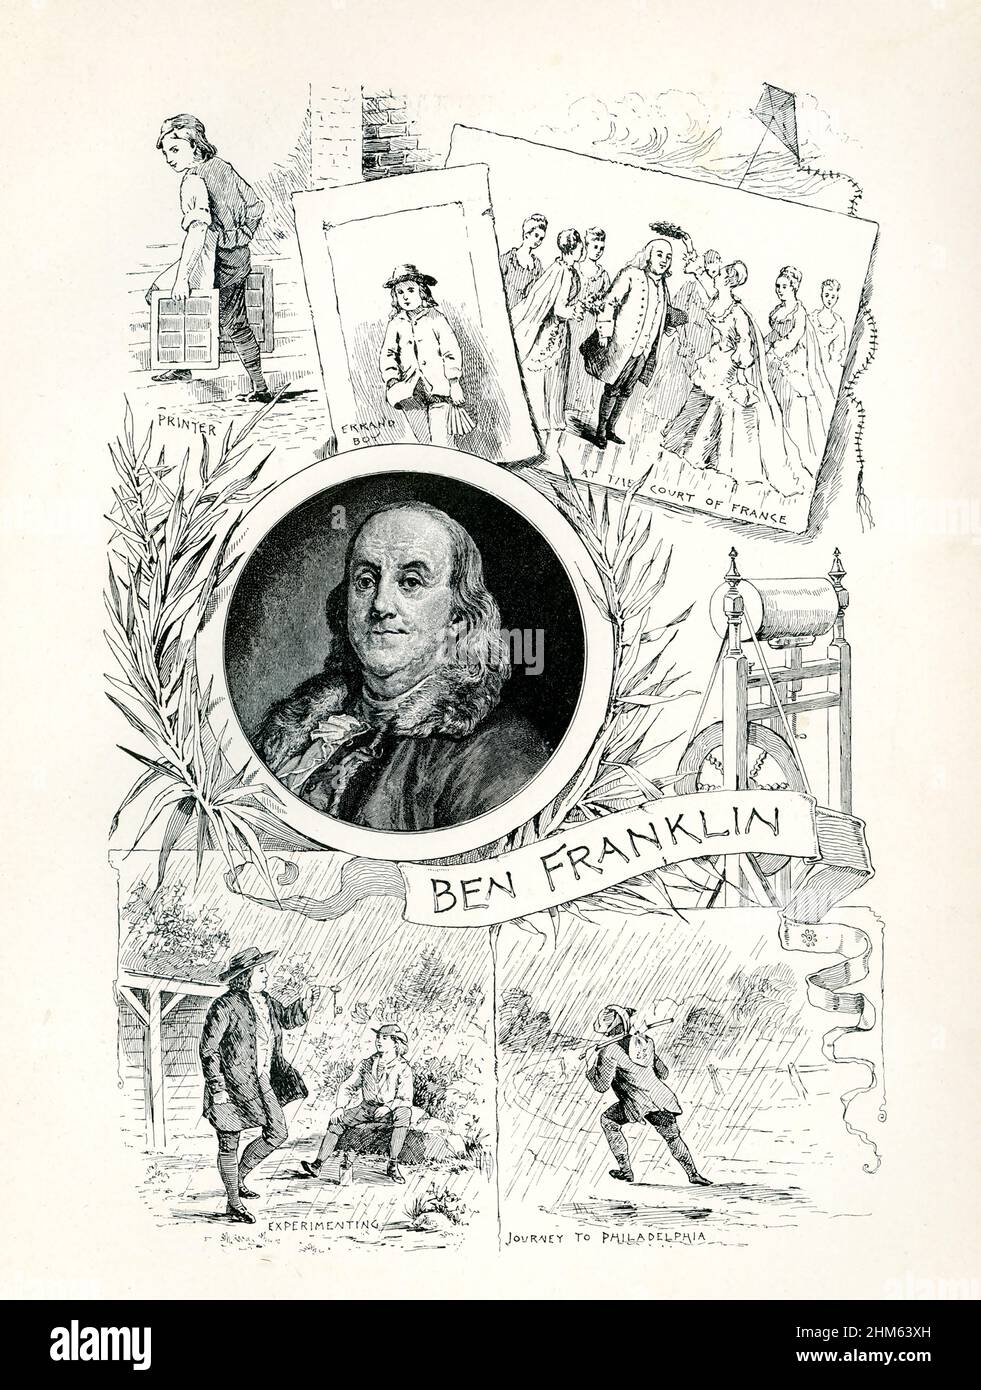 This illustration features several aspects of Ben Franklin's life. From top, left to right, they are: Printer, Errand boy, The court of France,' Bottom, left to right: Experimenting, Journey to Philladelphia.  Benjamin Franklin (1706-1790) was born in Boston and then in 1723 went to work in Philadelphia as a printer. One of the Founding Fathers of the United States, Franklin was an American polymath who was active as a writer, scientist, inventor, statesman, diplomat, printer, publisher and political philosopher. Stock Photo